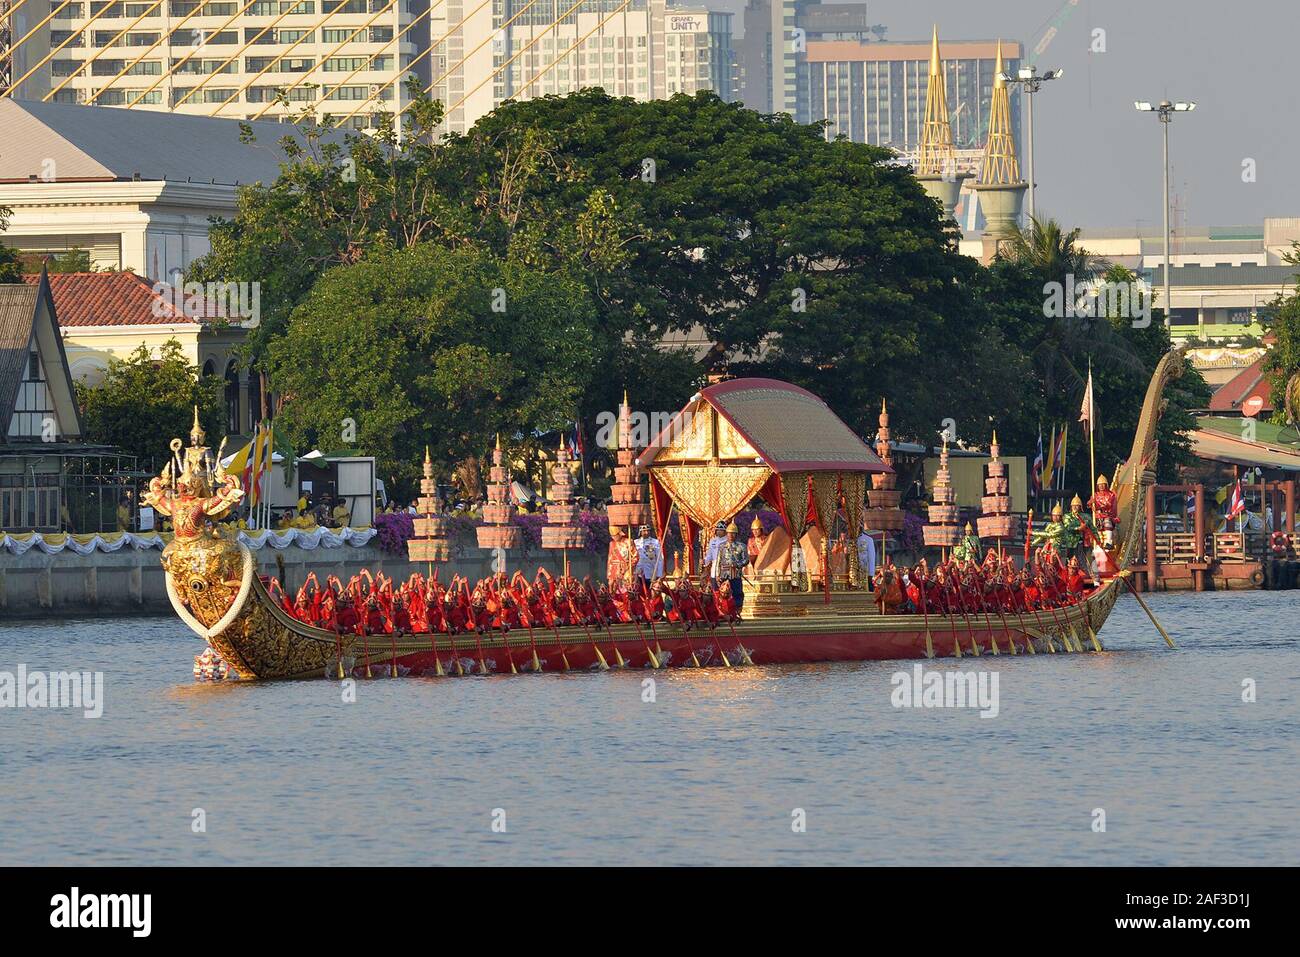 Bangkok. 12th Dec, 2019. Photo taken on Dec. 12, 2019 shows a view of the royal barge procession along the Chao Phraya River in Bangkok, Thailand. A spectacular royal barge procession which graced through Bangkok's main river on Thursday marked the completion of the royal coronation ceremony for King Vajiralongkorn. Credit: Rachen Sageamsak/Xinhua/Alamy Live News Stock Photo